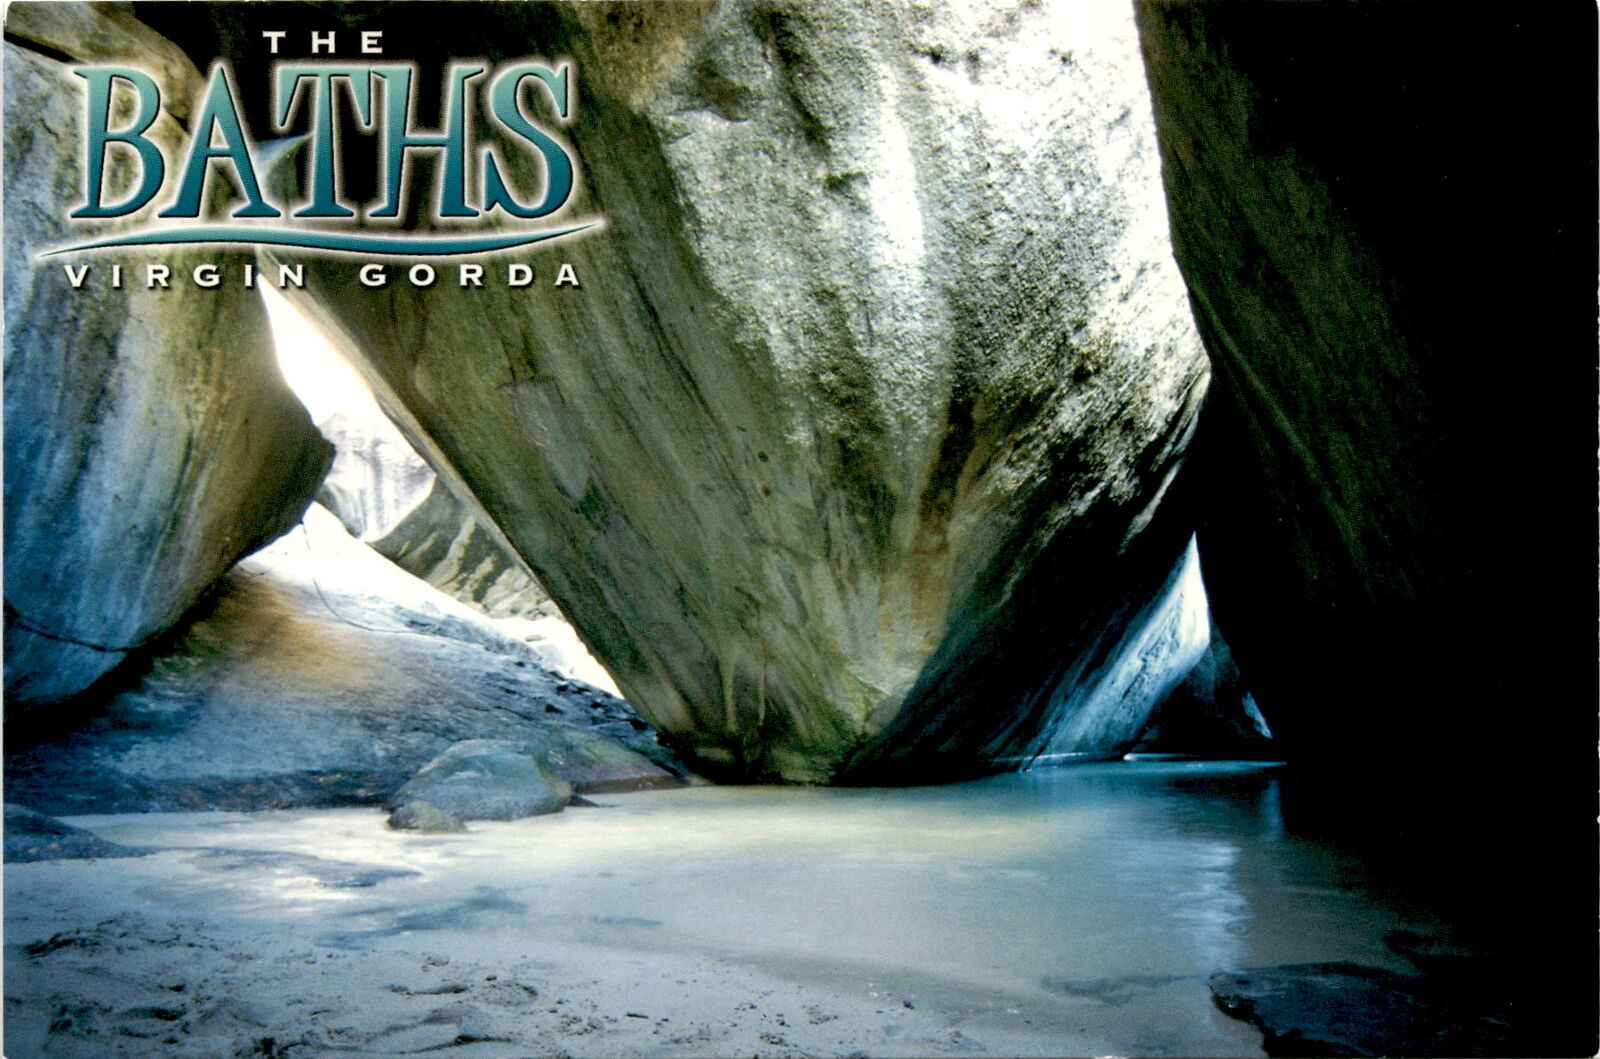 Postcard showcases The Baths in Virgin Gorda, BVI, with contact details.